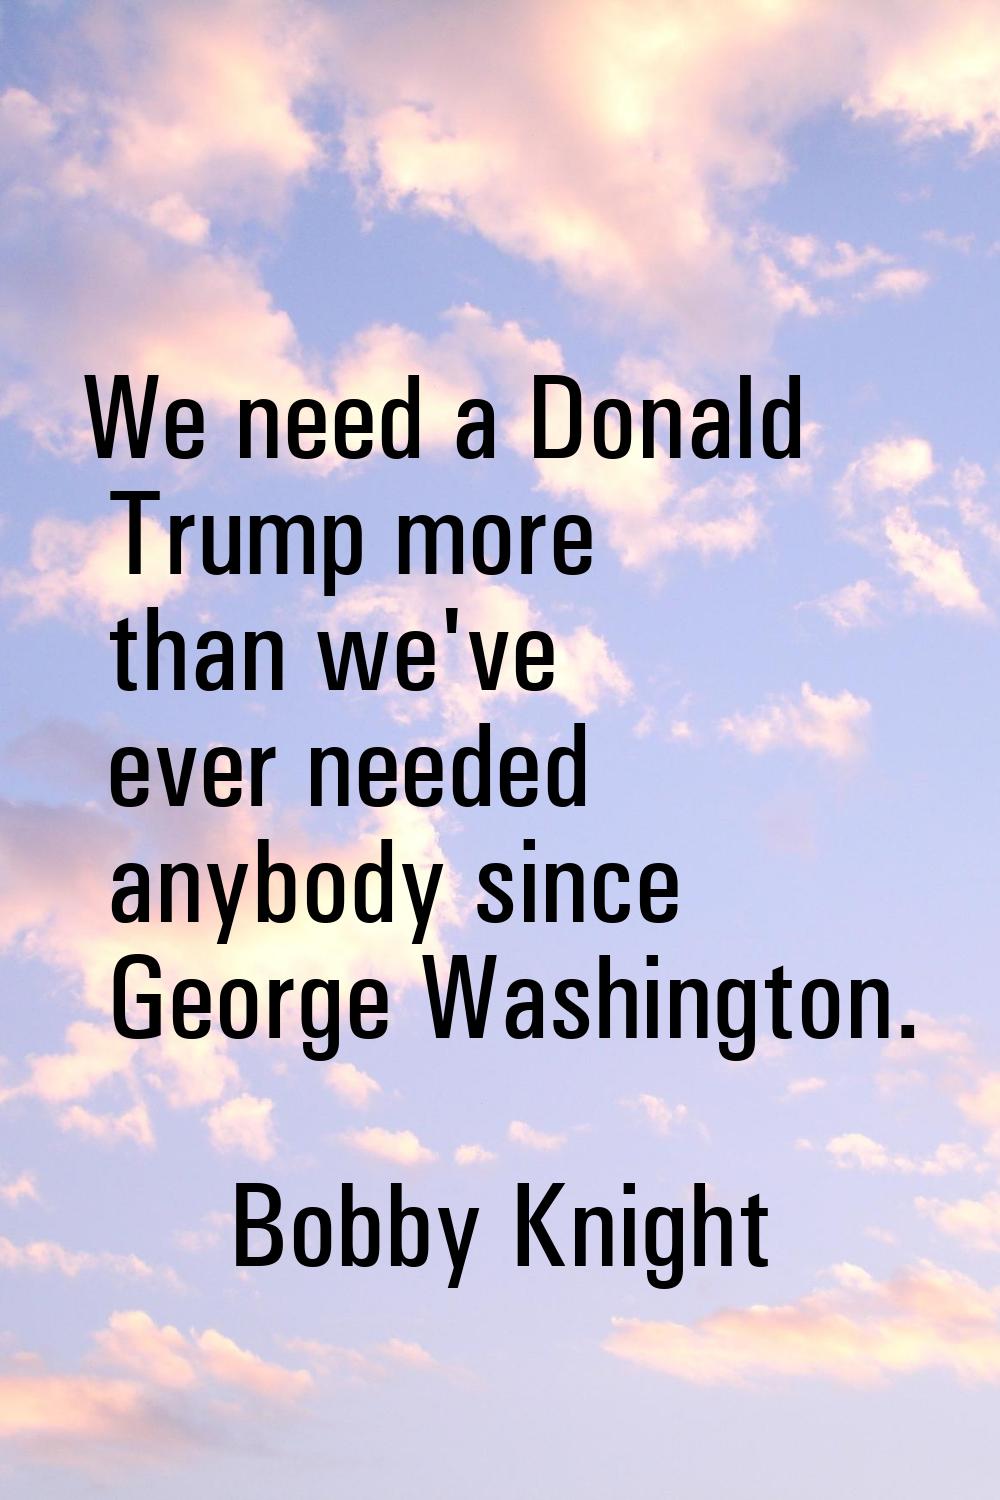 We need a Donald Trump more than we've ever needed anybody since George Washington.